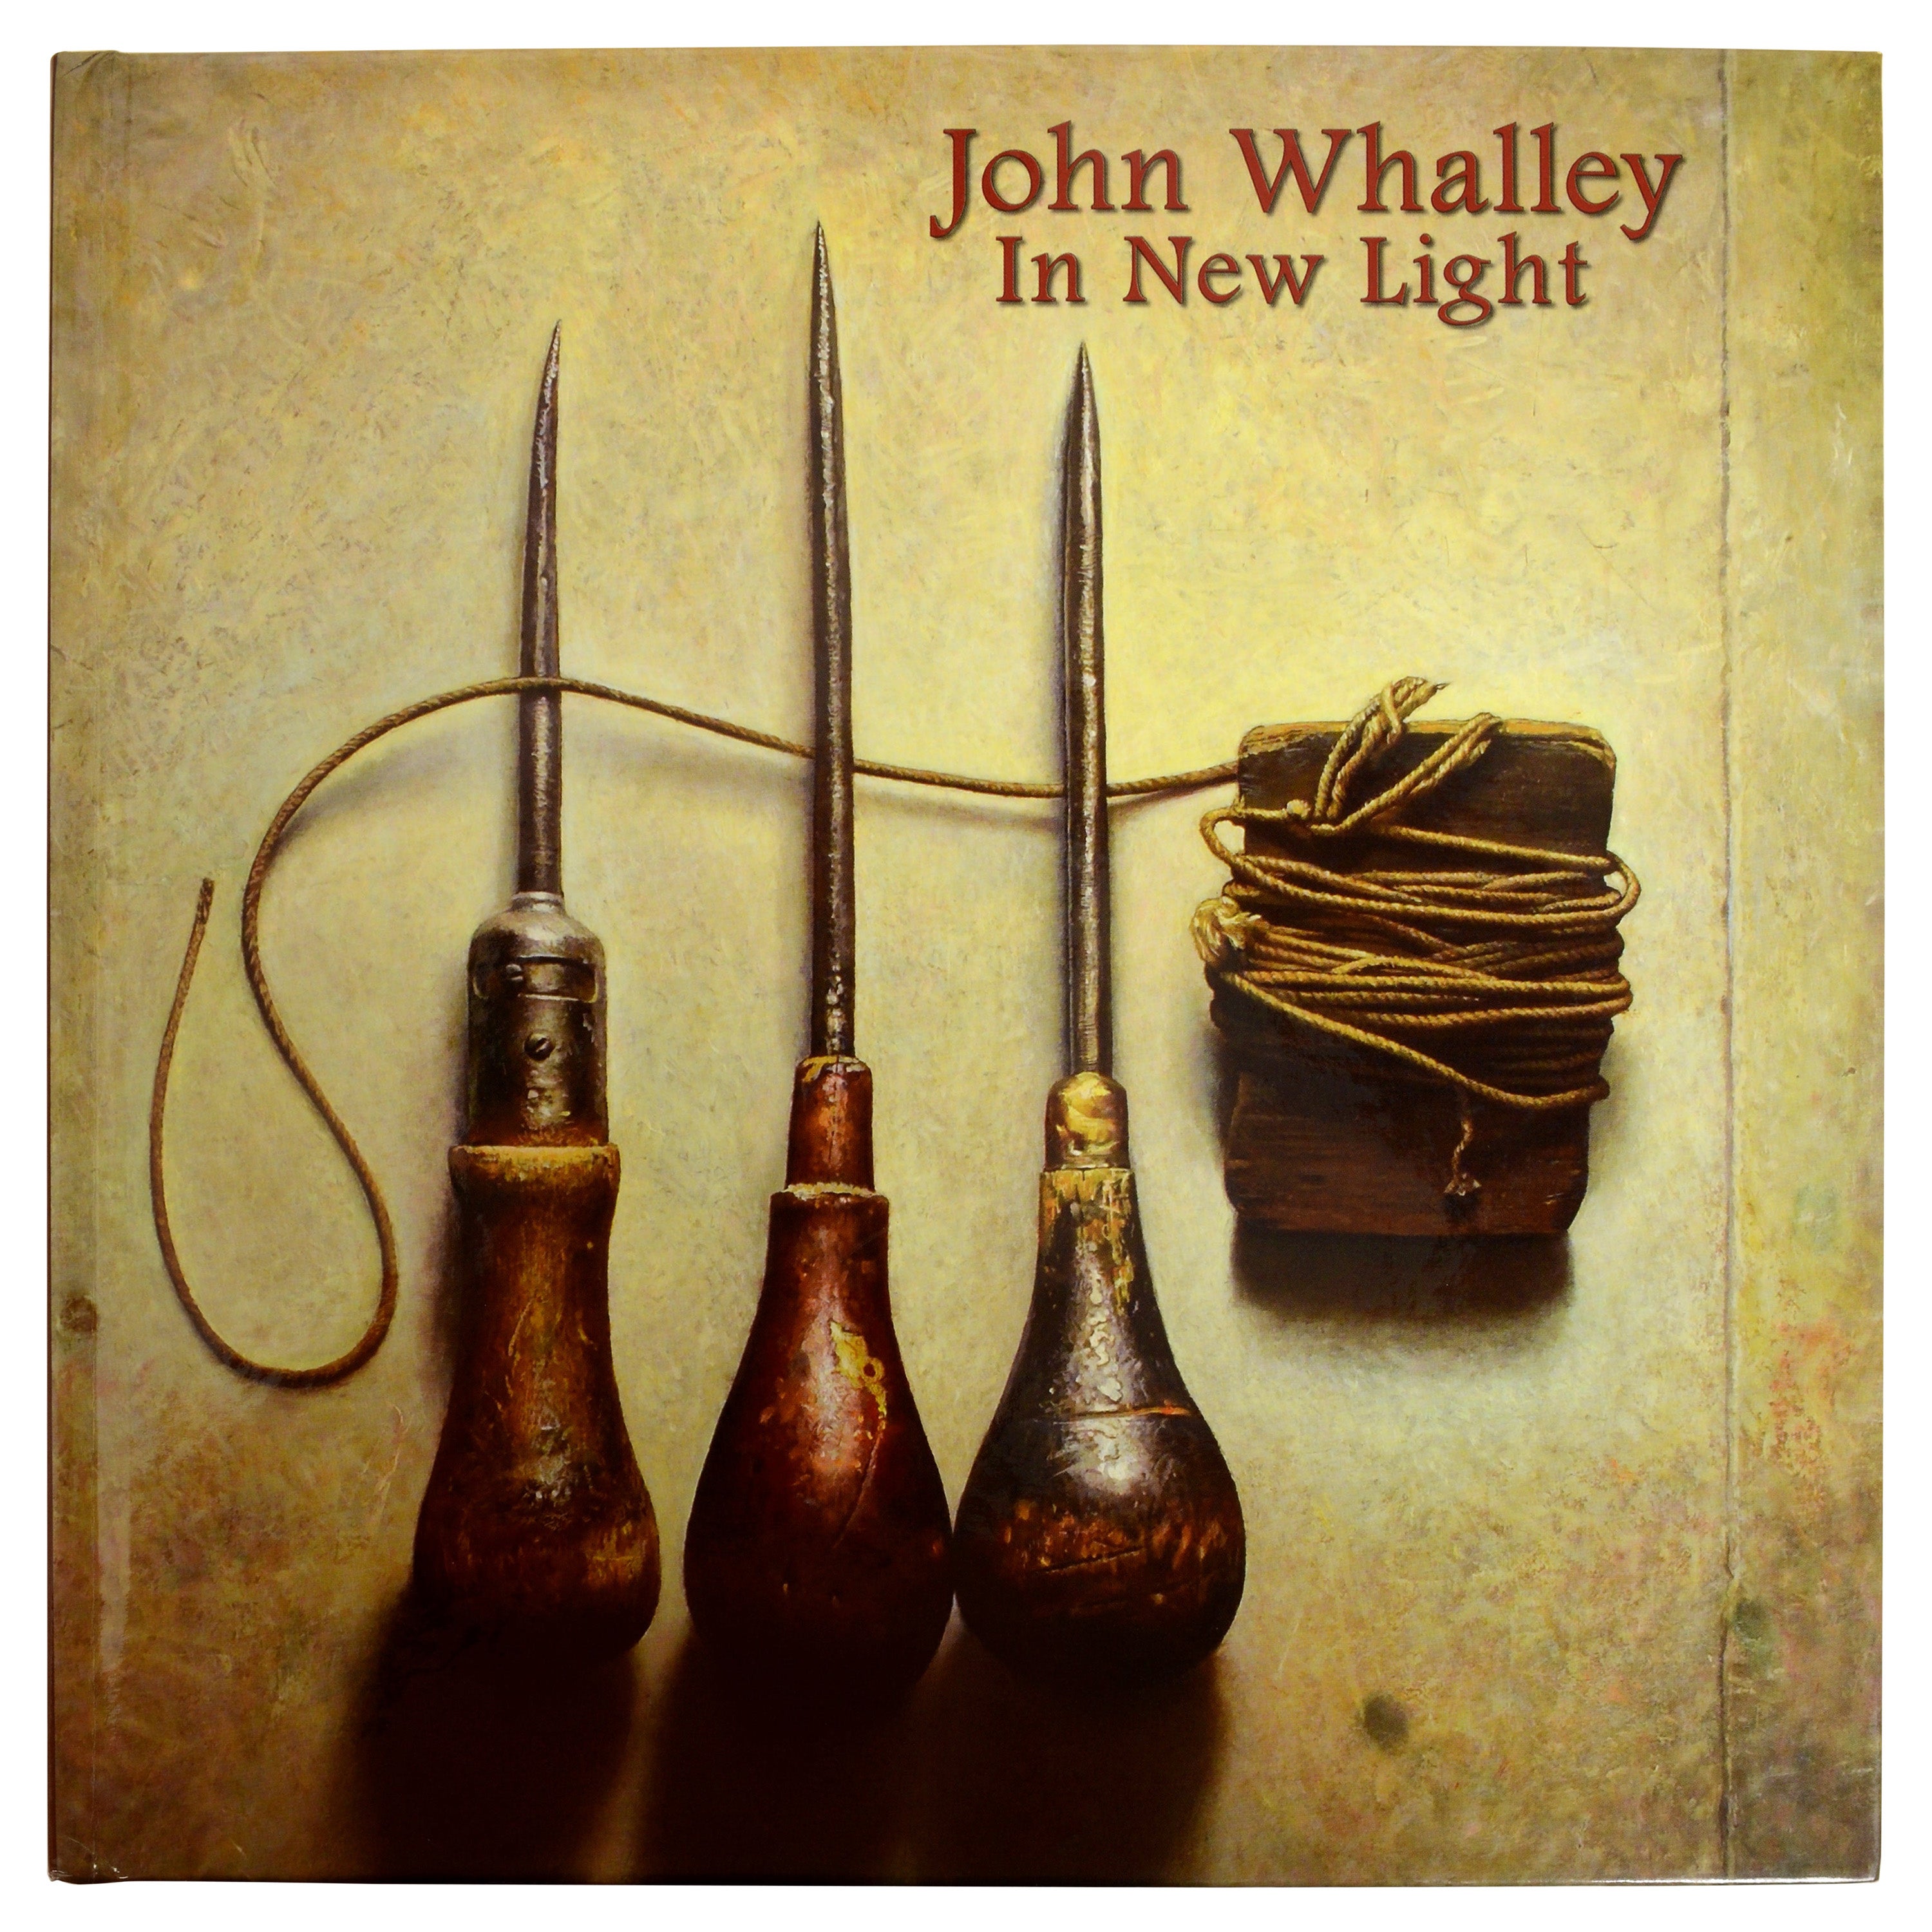 John Whalley In New Light by John Whalley, Signed 1st Ed